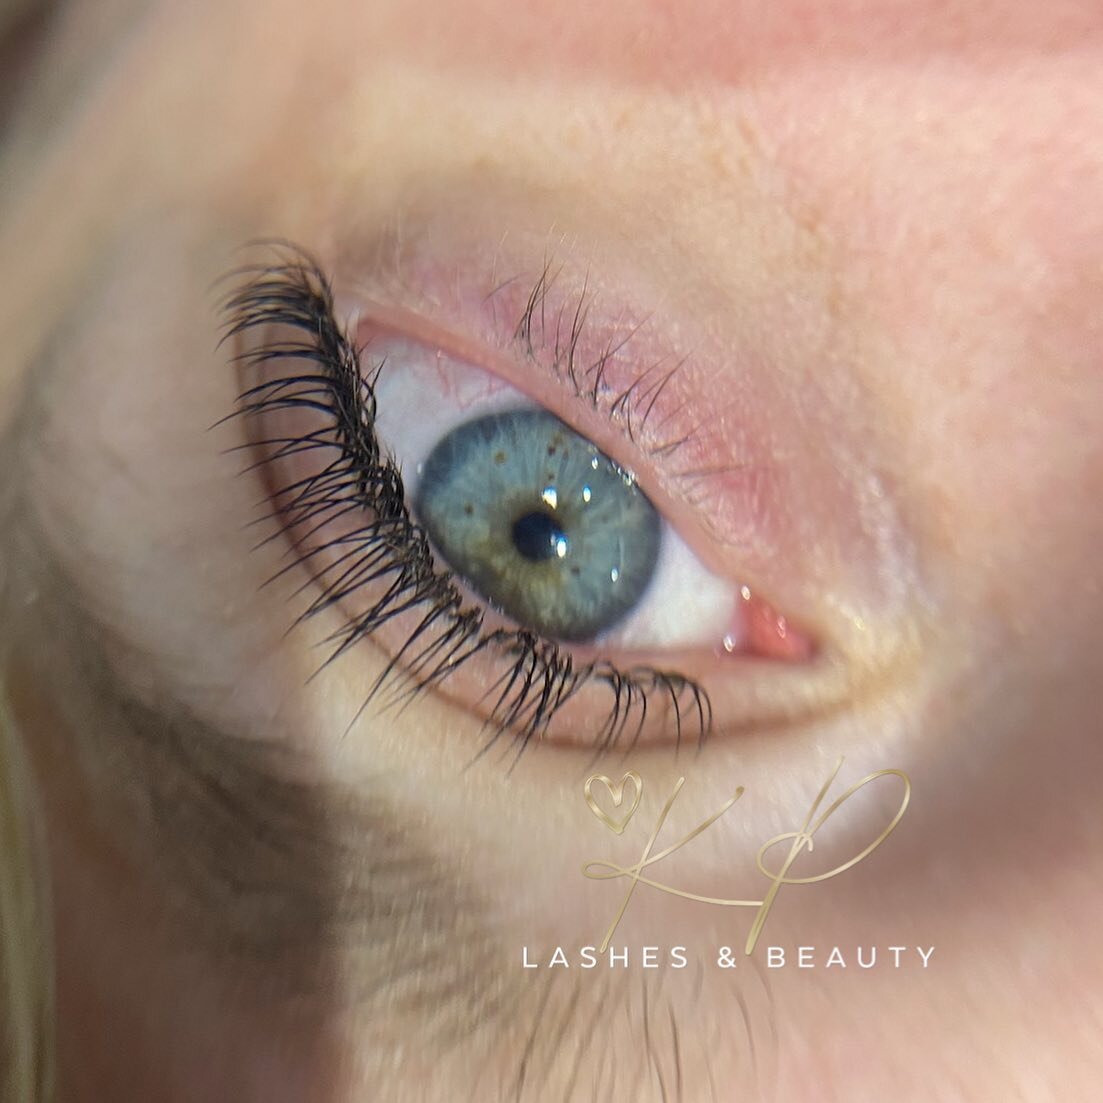 Sometimes a Classic Lash is all you need. How beautiful is this clients eye colour though?😘

#russianvolume #russianvolumelashes #lashextensions #lashes #lashaddict #lashextension #volumelashes #volumefans #russianlashes #beauty #beautiful #mega vol